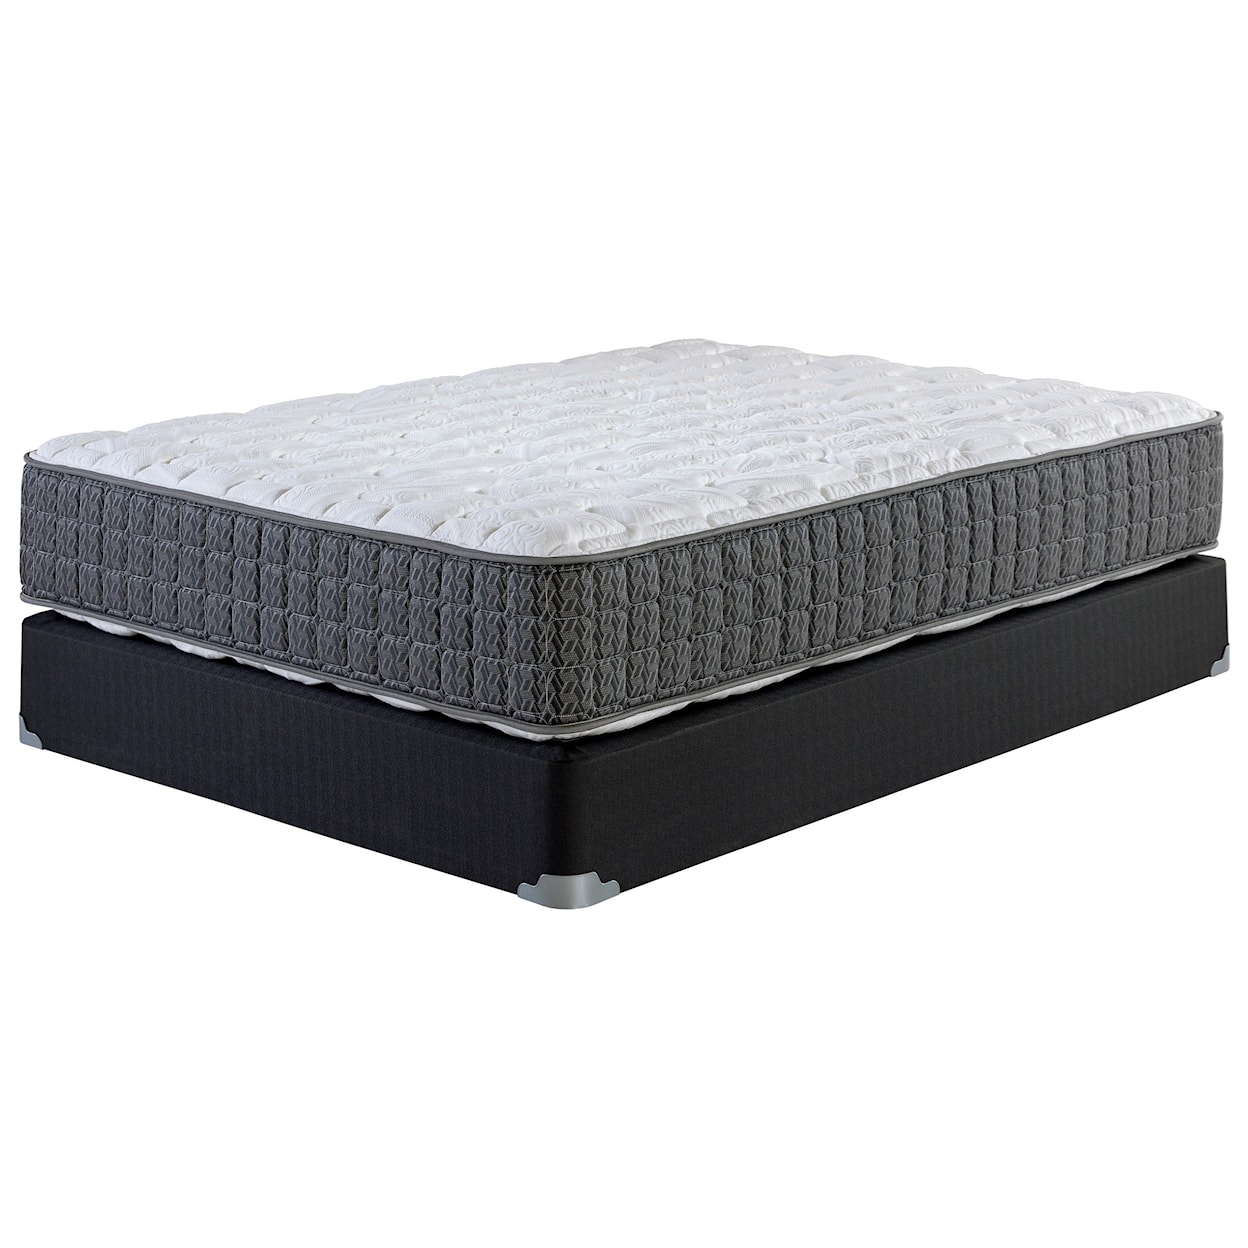 Corsicana Rossington Firm Full Firm Two Sided Mattress Set